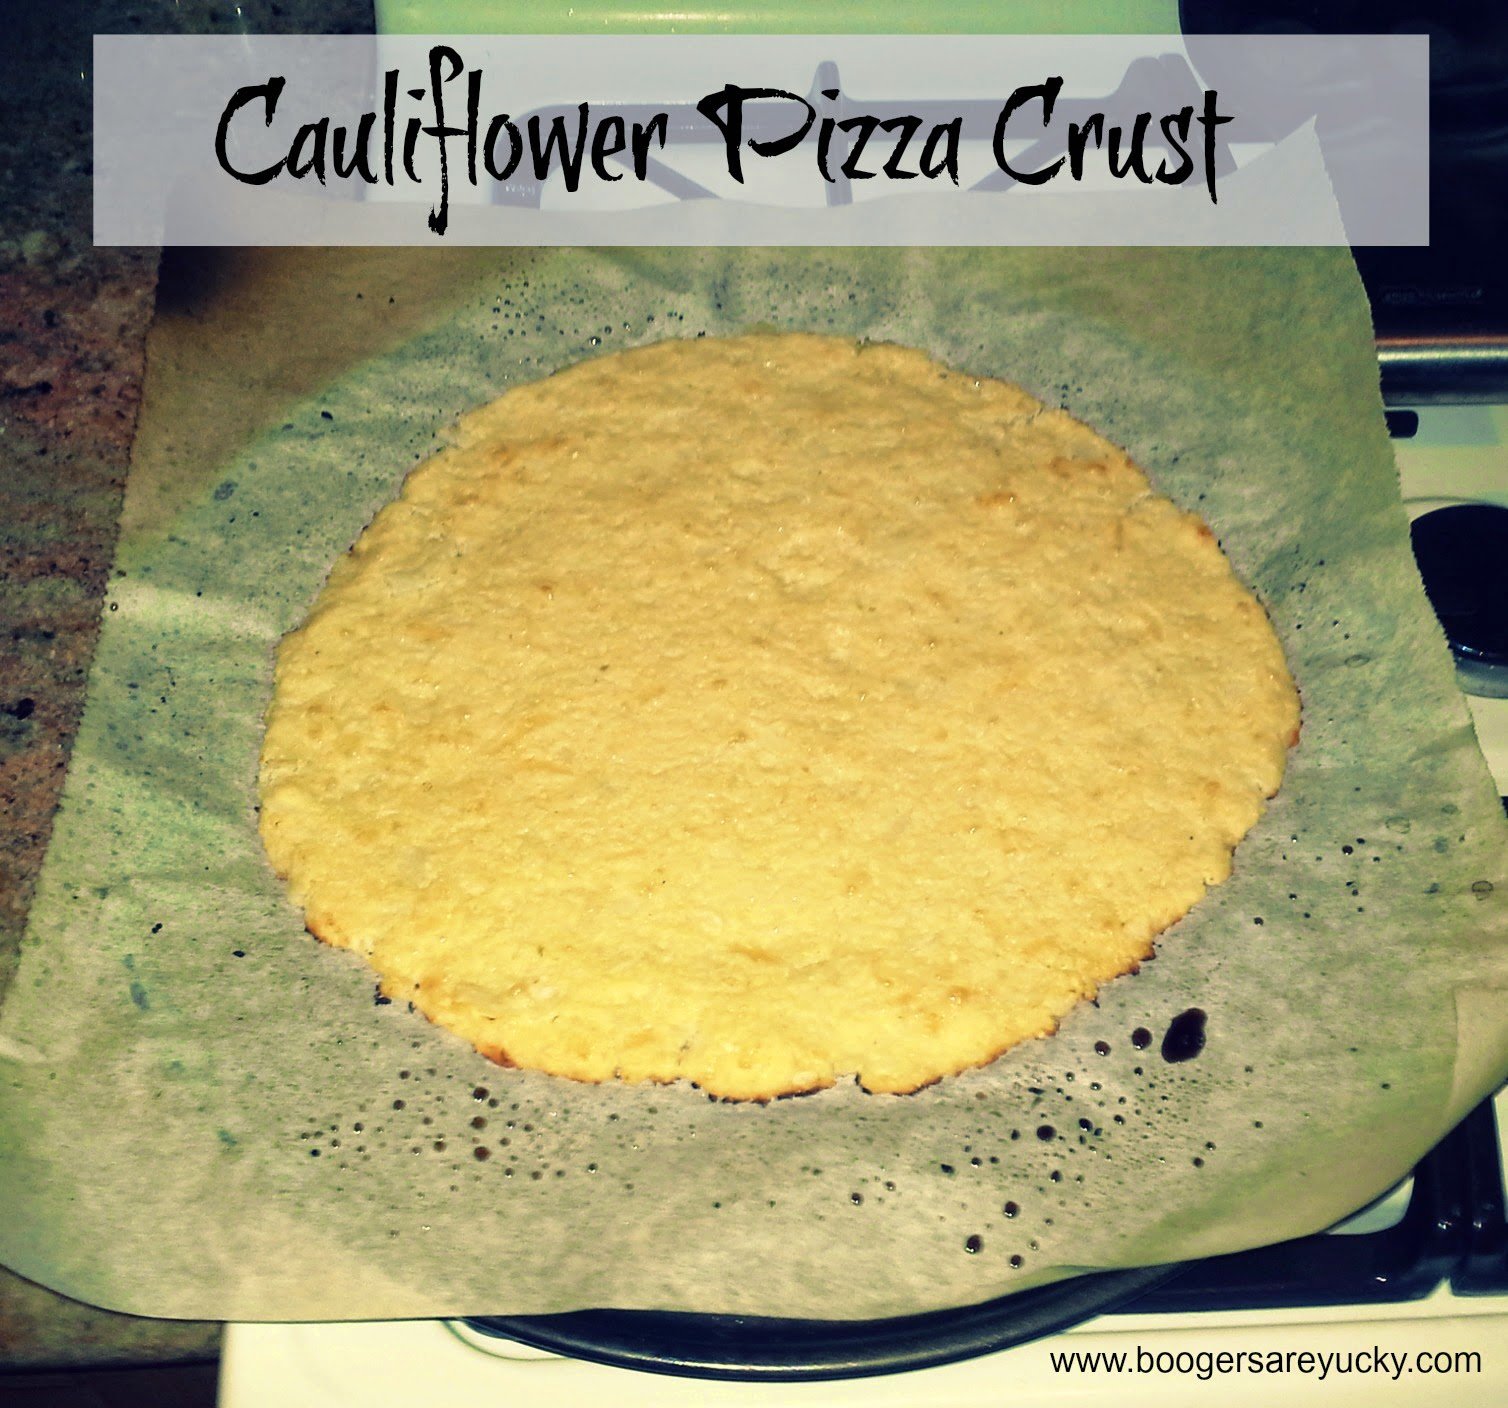 Cauliflower Pizza Crust baked before adding toppings